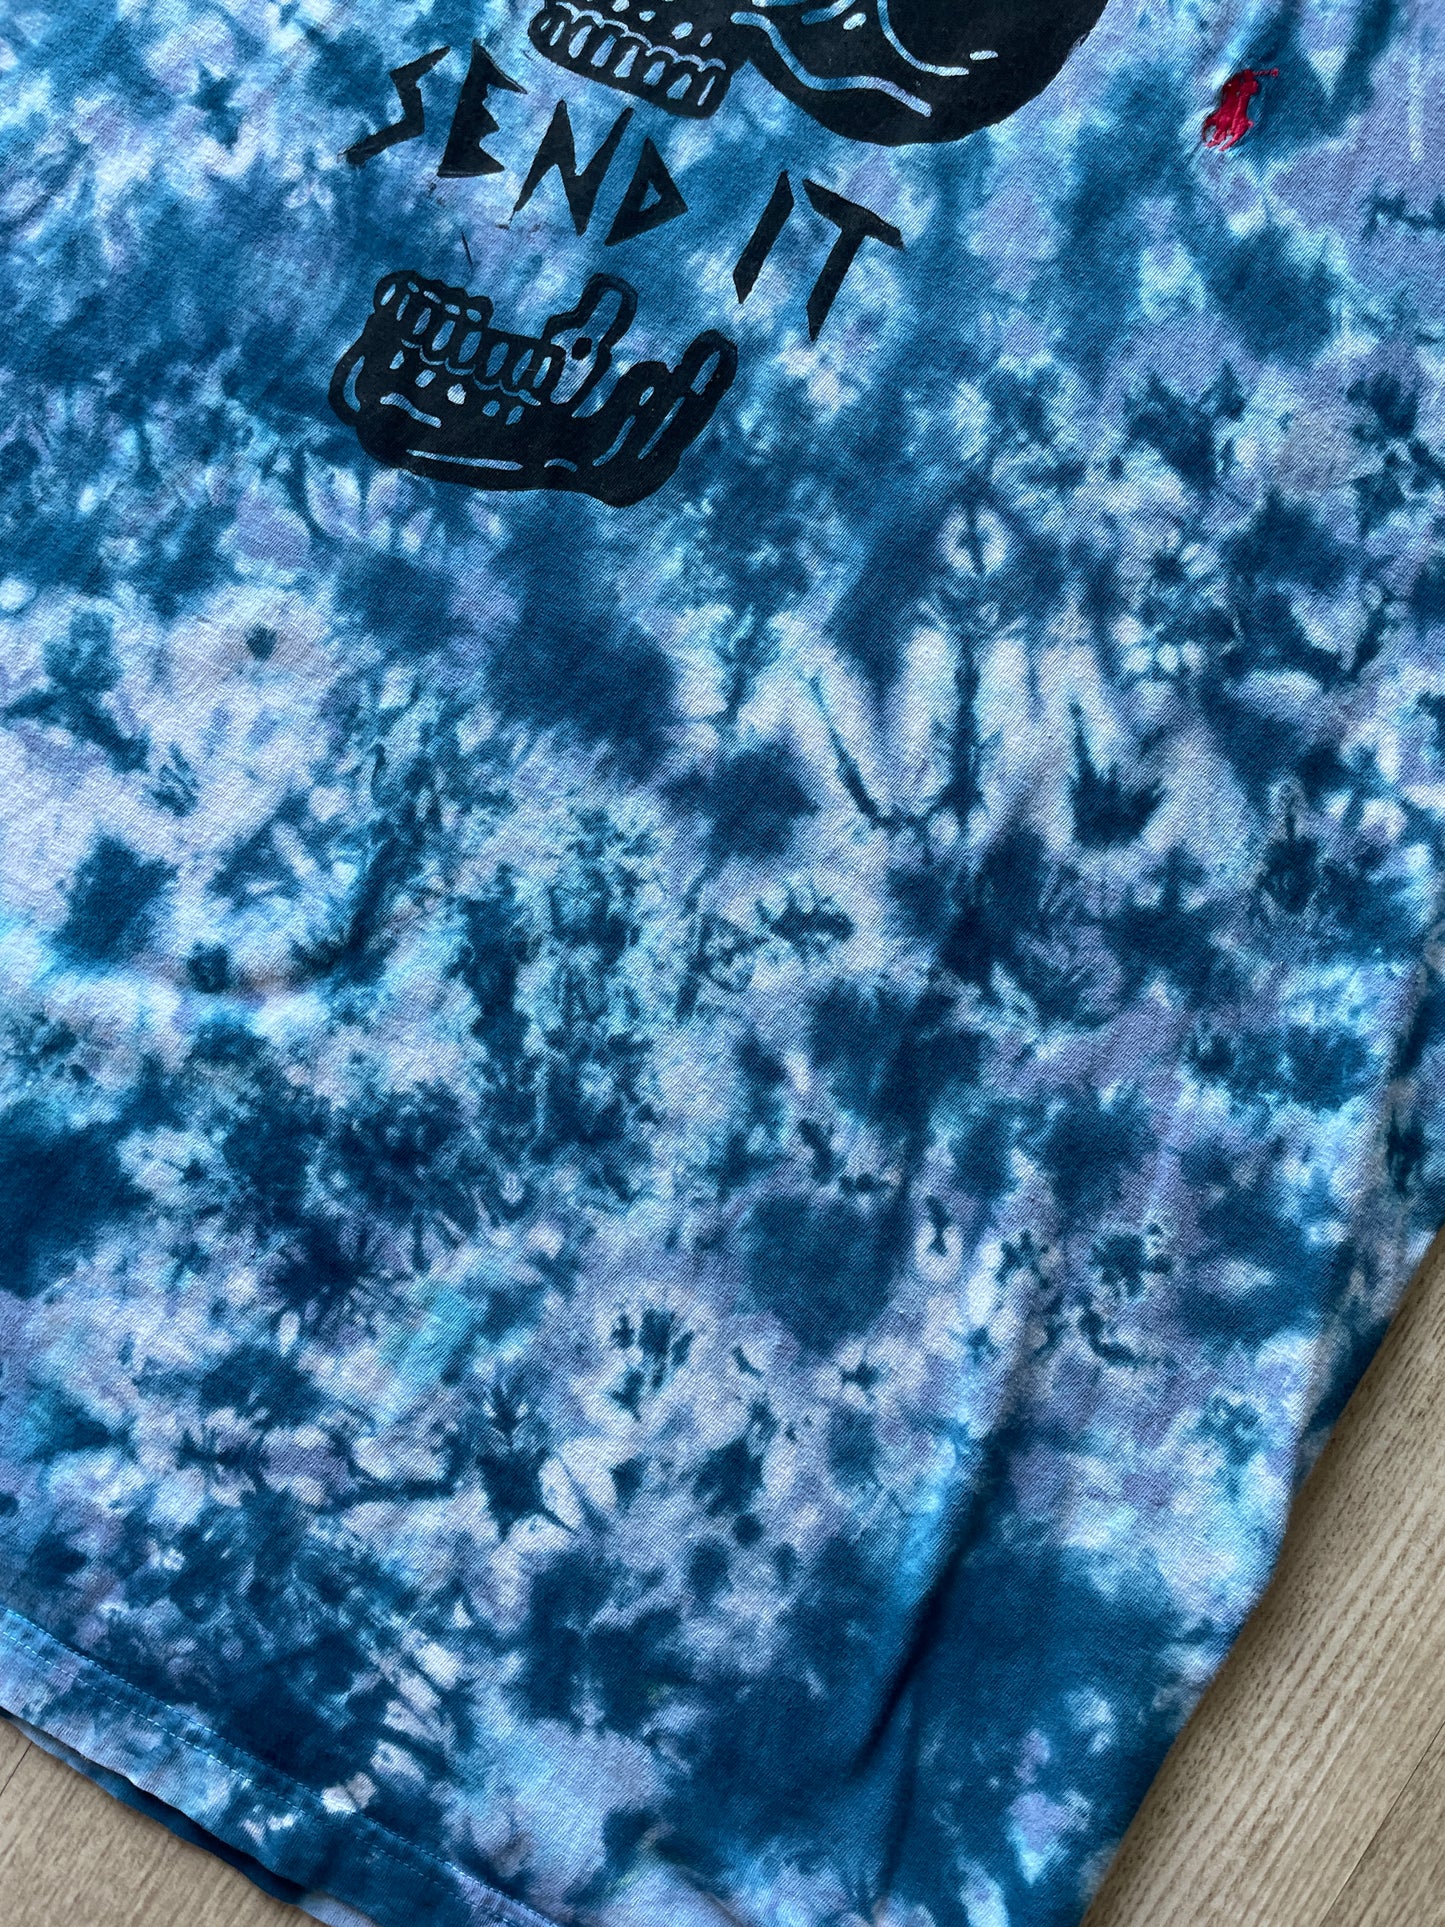 XL Men's Send It Skull Handmade Reverse Tie Dye Short Sleeve T-Shirt | One-Of-a-Kind Upcycled Blue and Black Crumpled Top